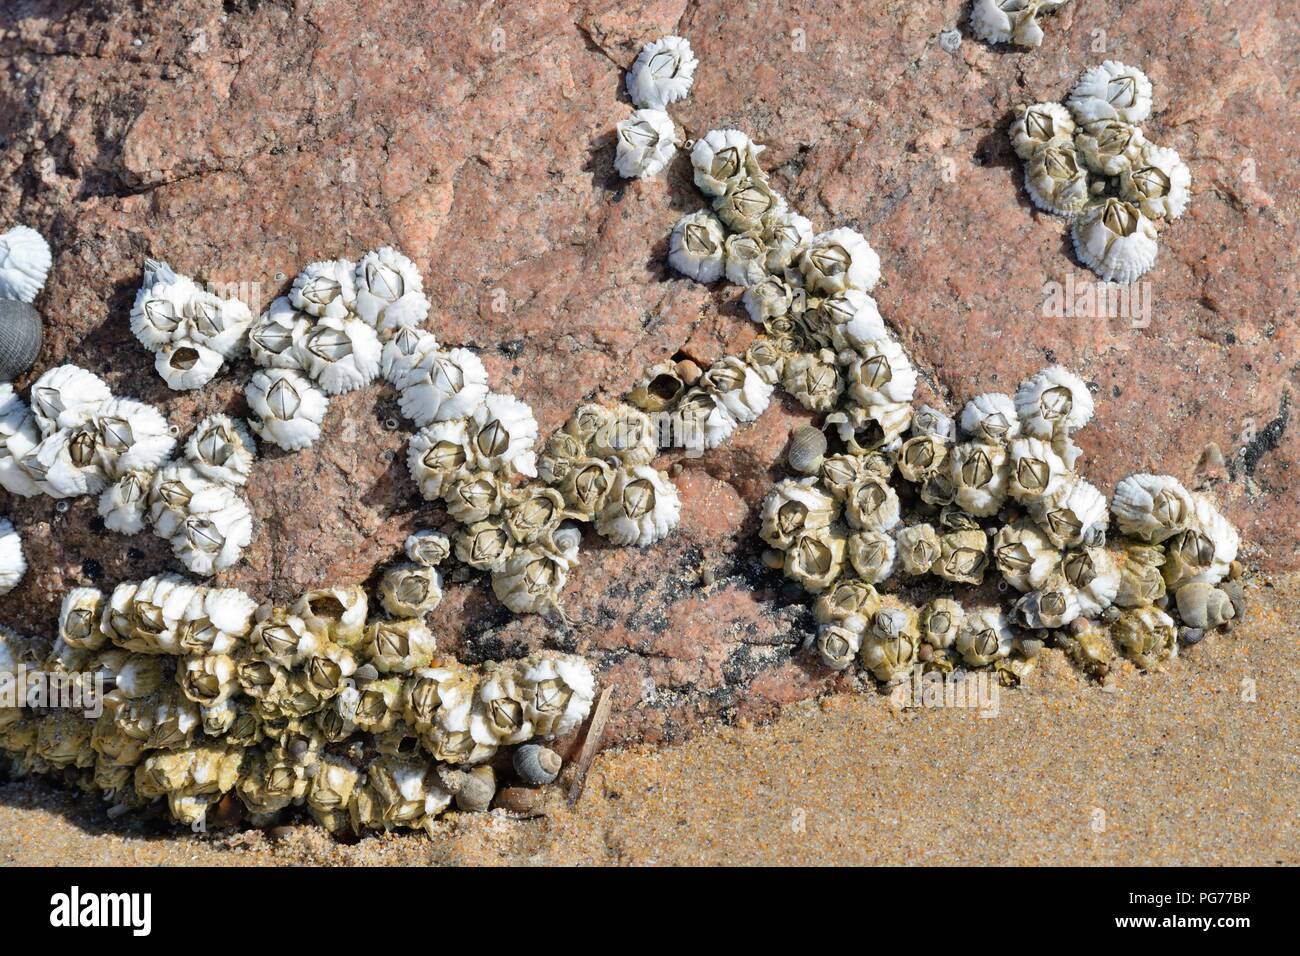 A cluster of barnacles (Cirripedia) attached to a rock on a sandy beach in Scotland, UK Stock Photo